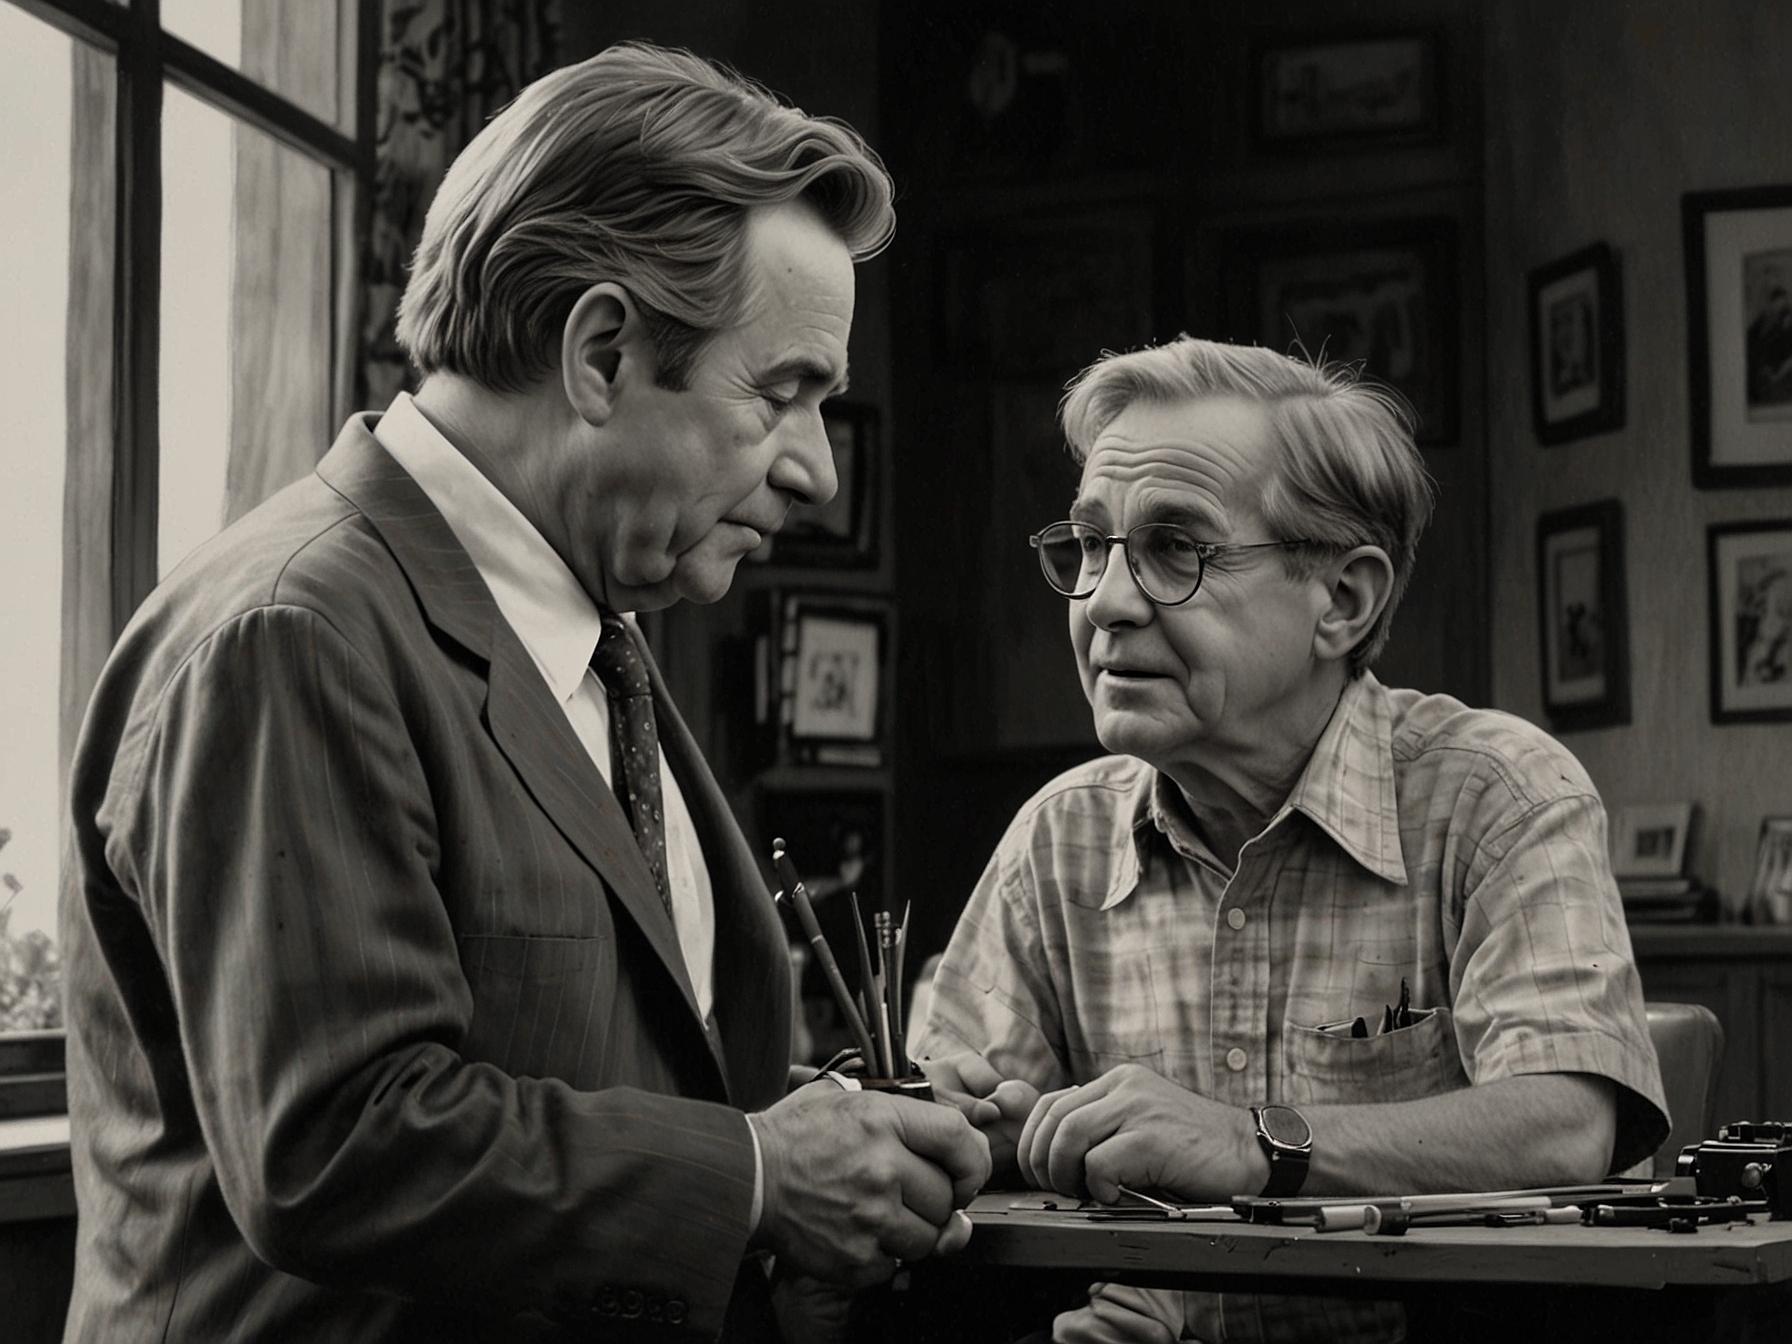 An emotionally charged still from 'Camera' featuring Beau Bridges as the elderly camera repairman mentoring the mute boy, highlighting the themes of friendship and human connection.